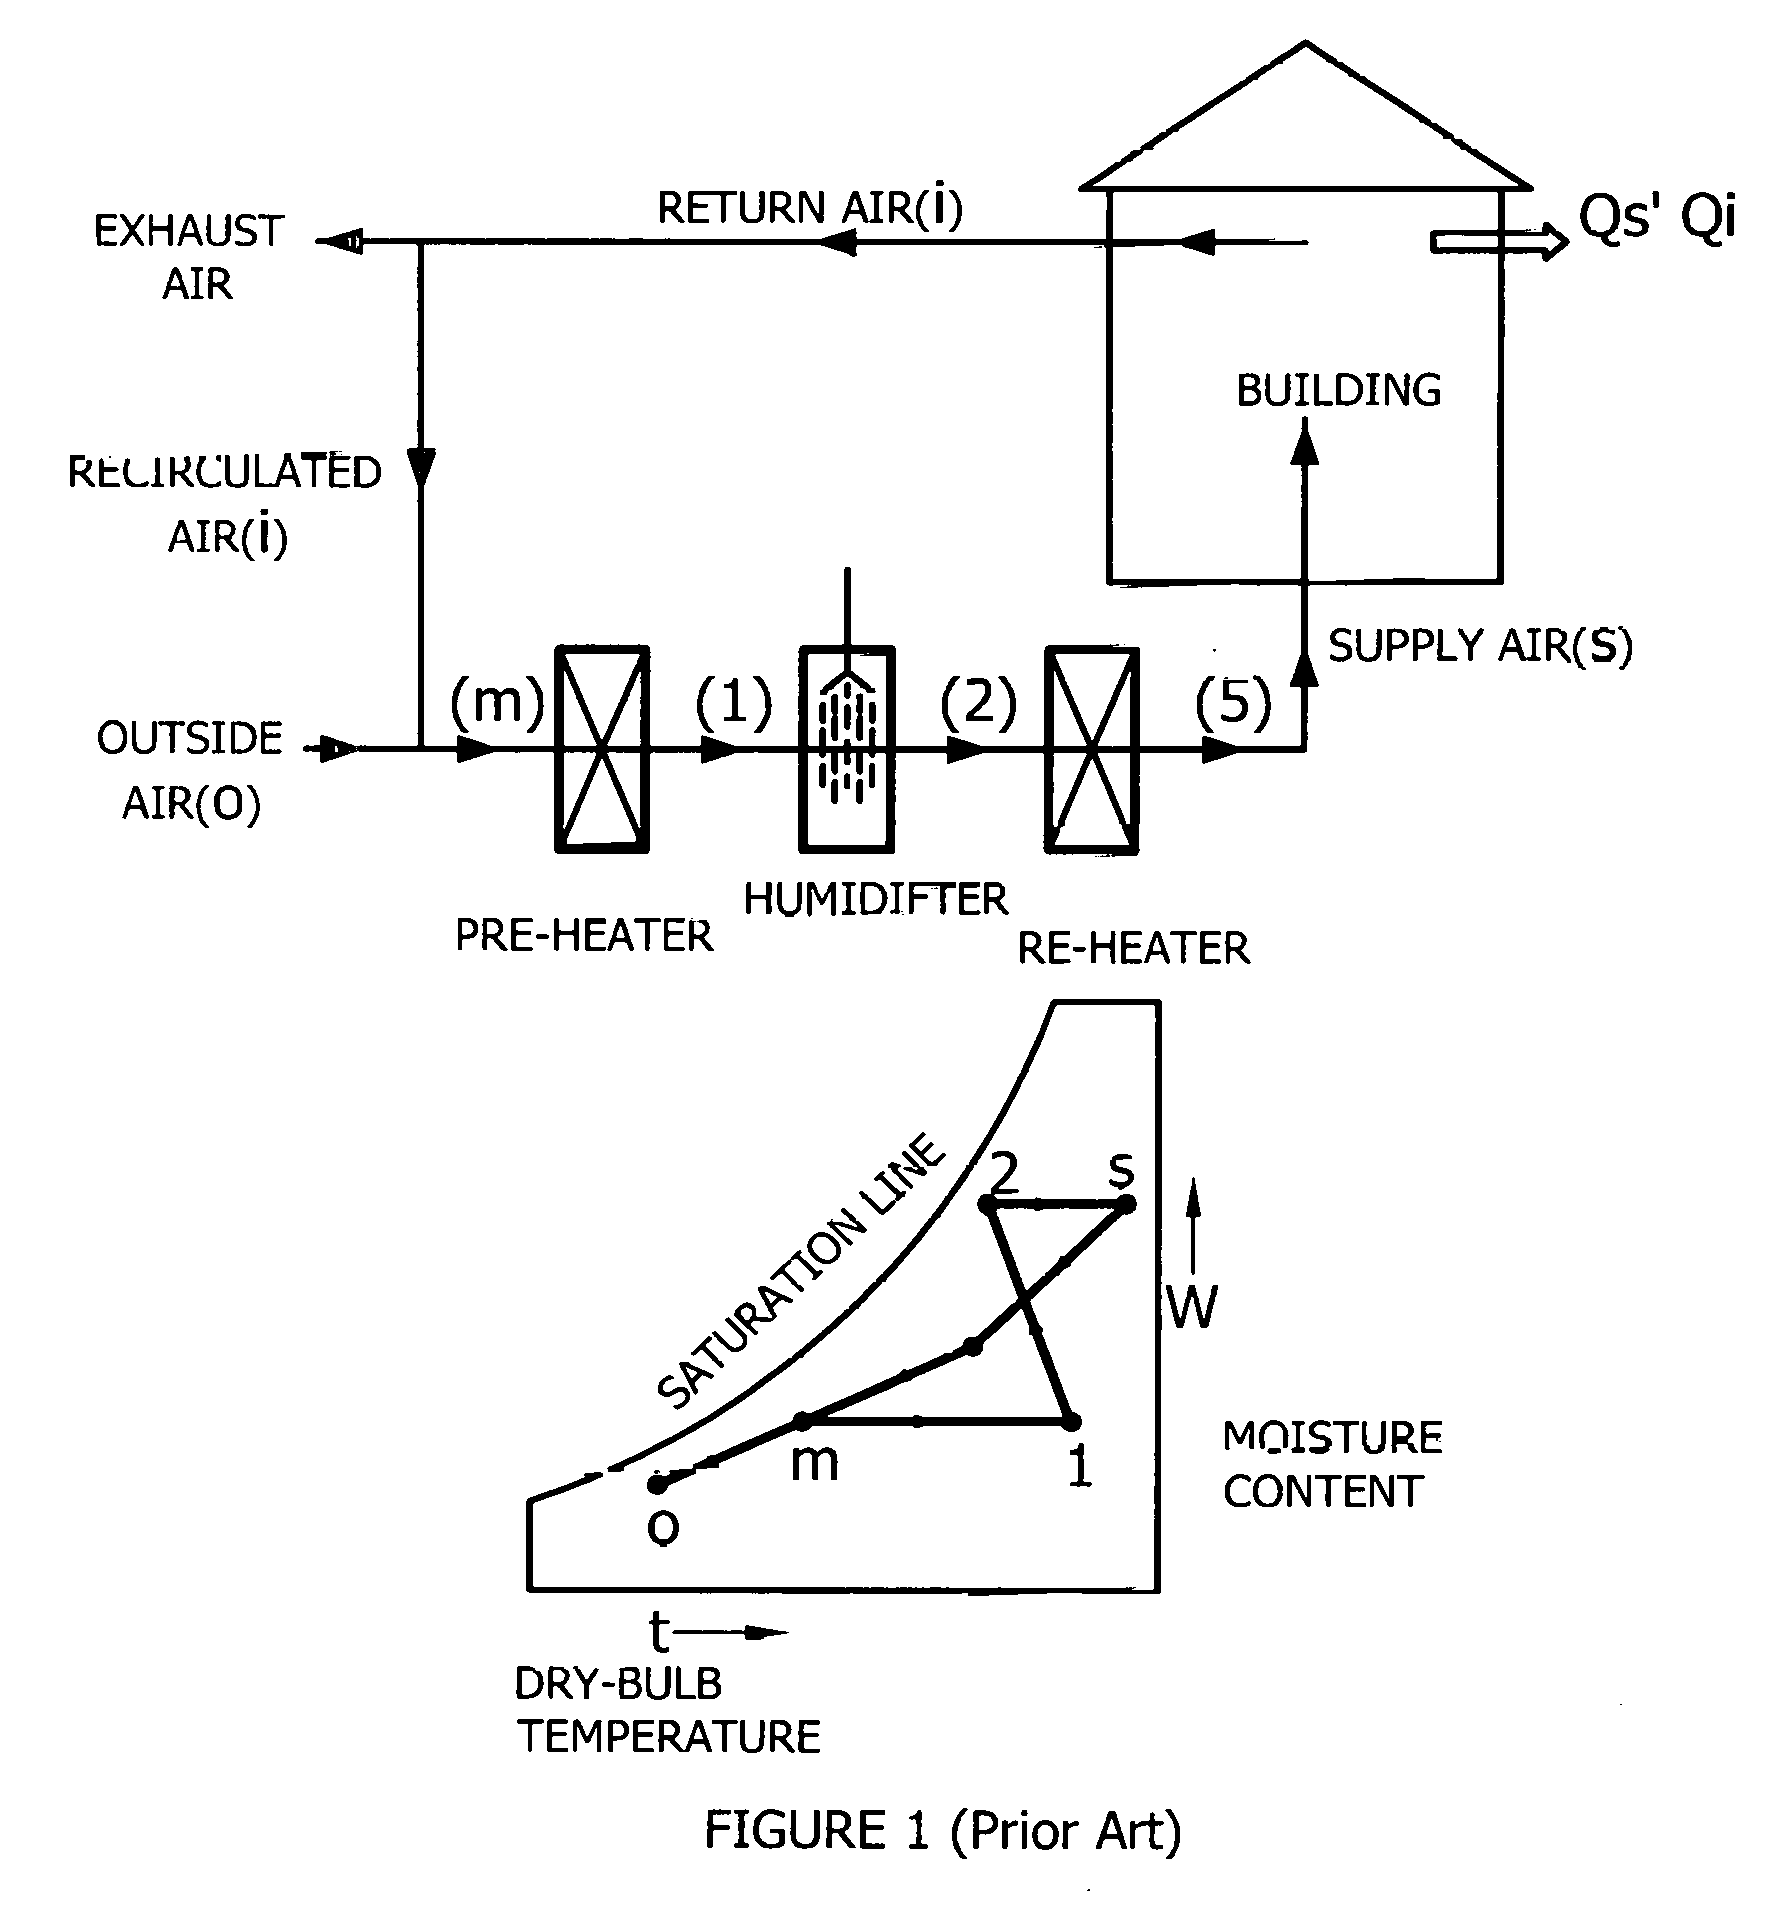 Method and systems for energy-saving heating and humidifying of buildings using outside air